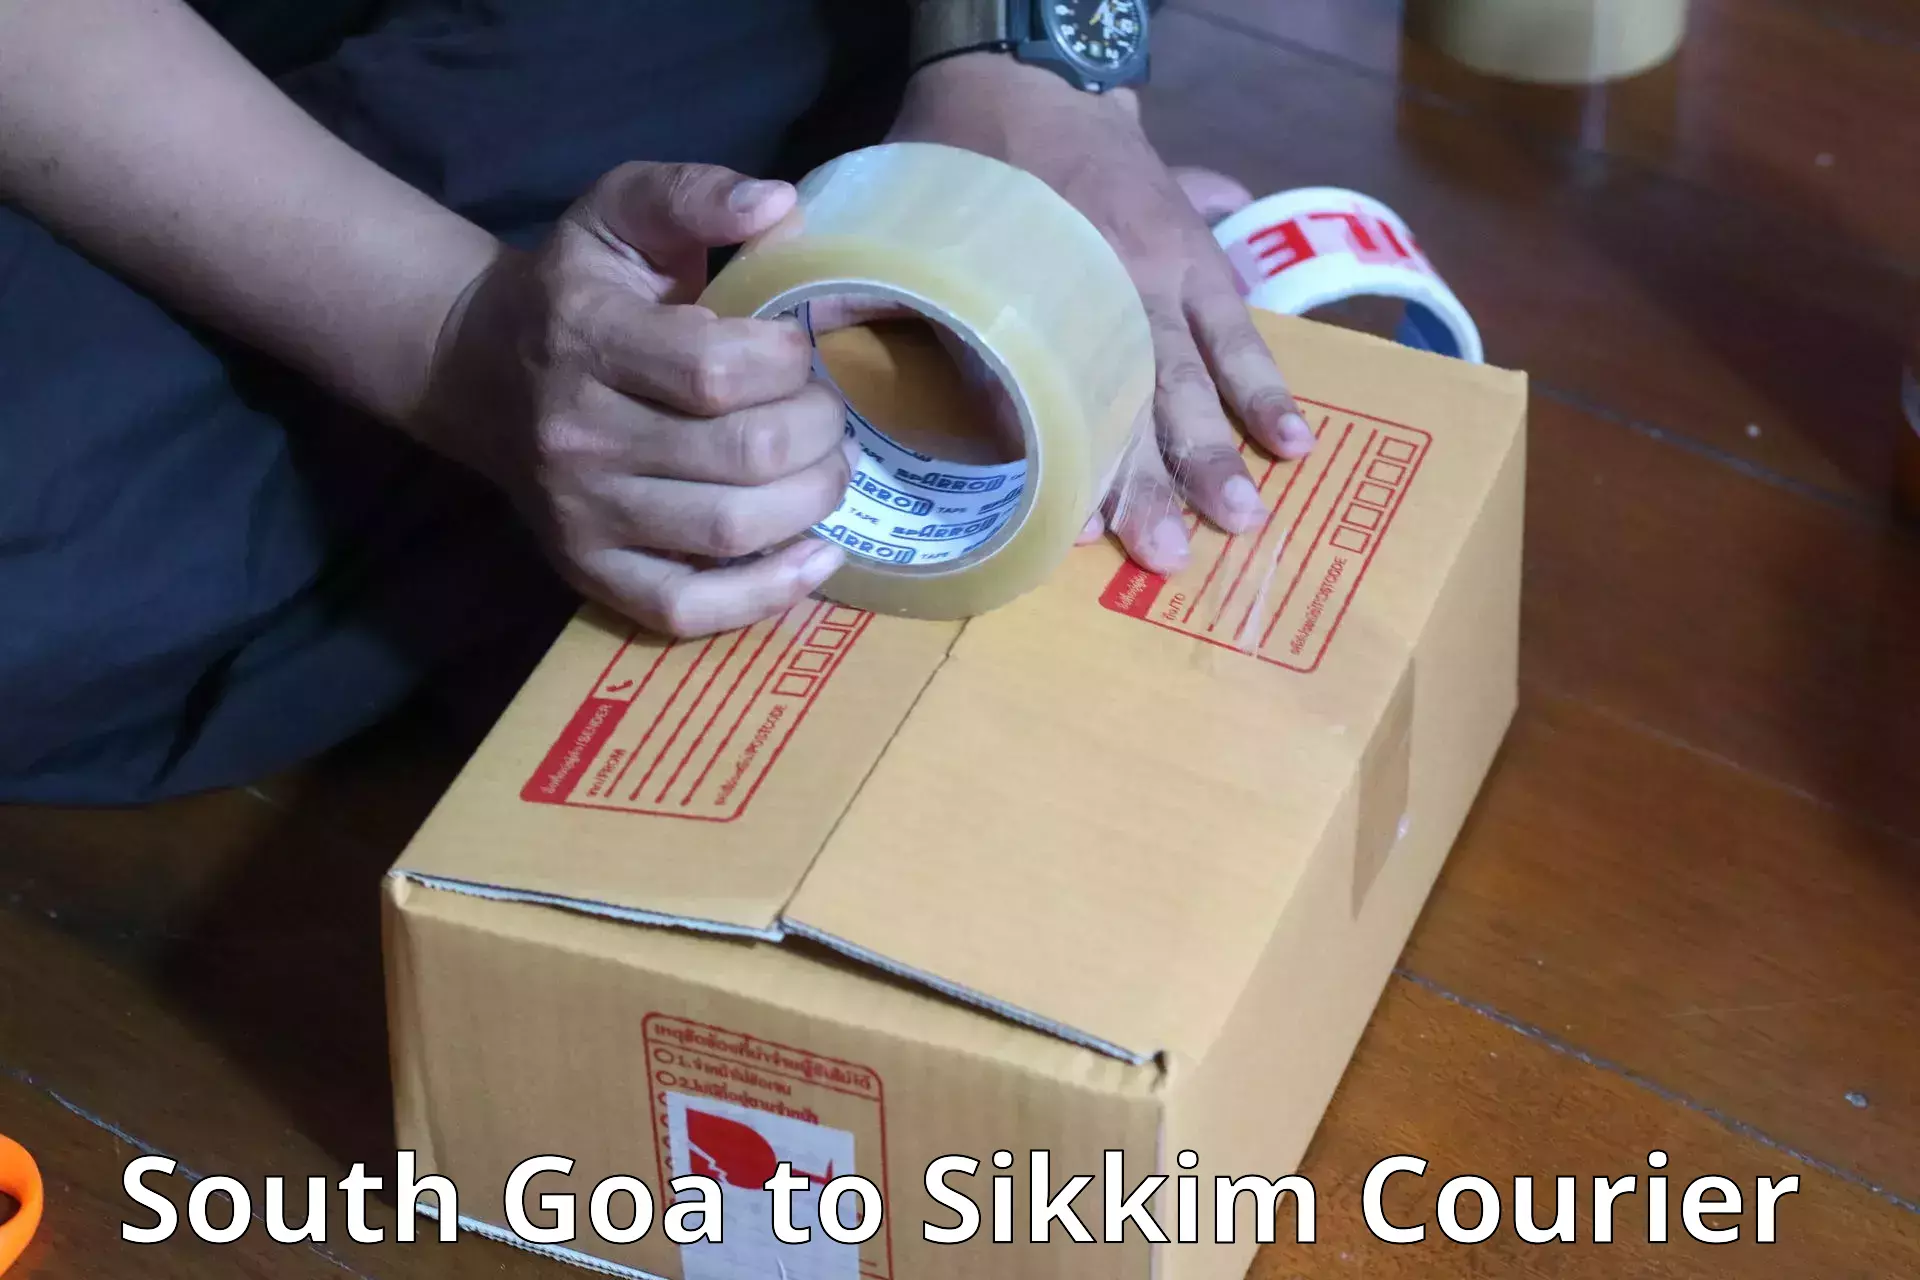 Luggage transport company South Goa to South Sikkim